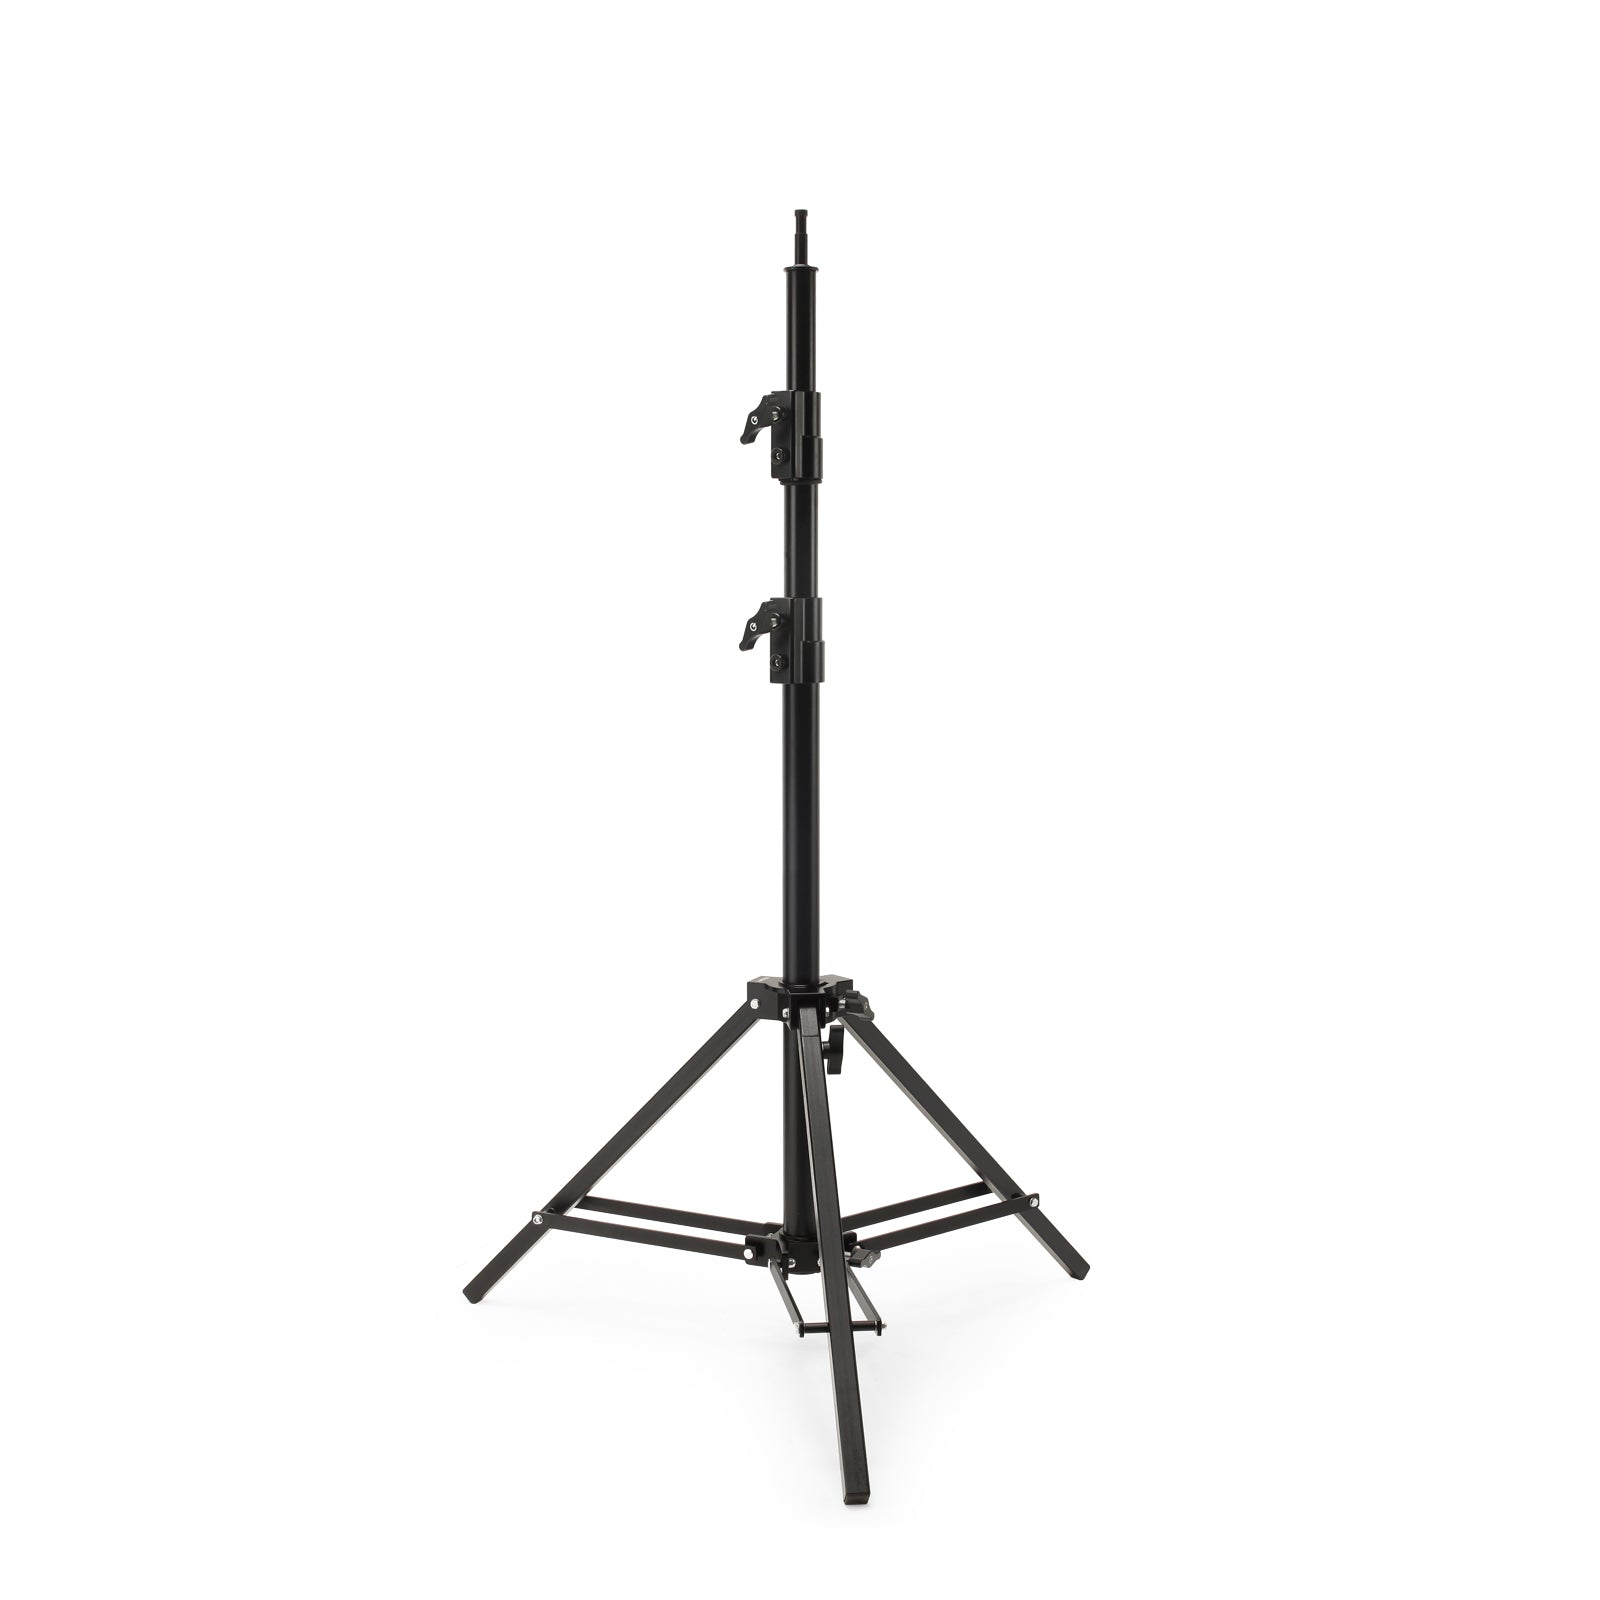 Proaim 3-Stage PTZ Camera Support Stand w 5/8” Baby Pin & Ball Head —